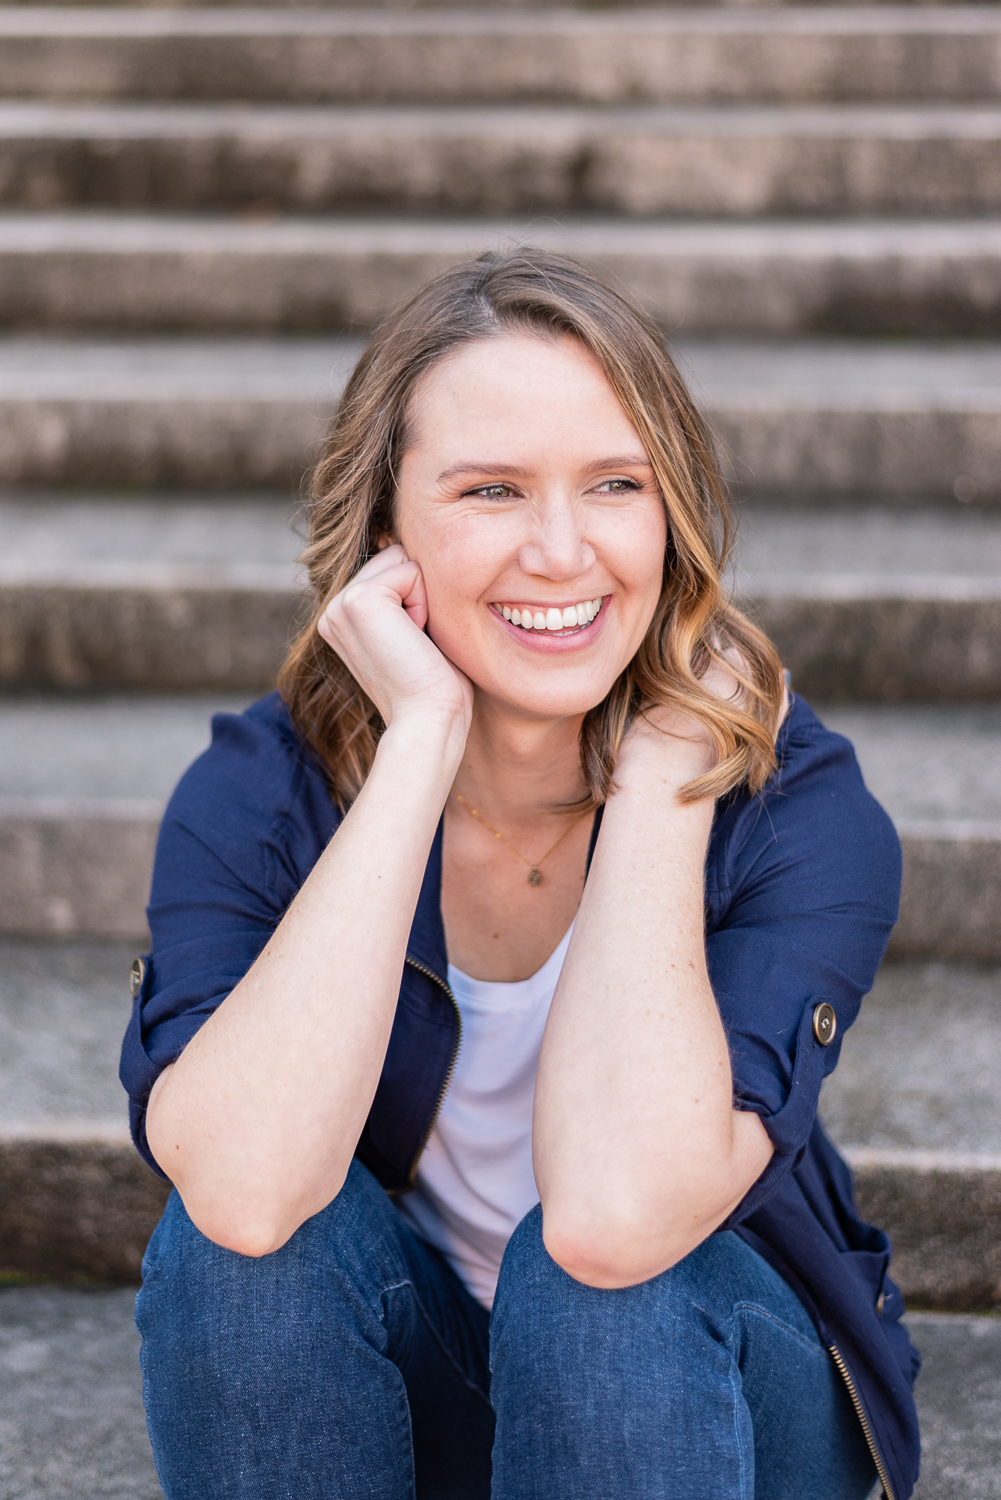 Branding headshot of a woman sitting on steps and laughing in downtown Knoxville, TN.